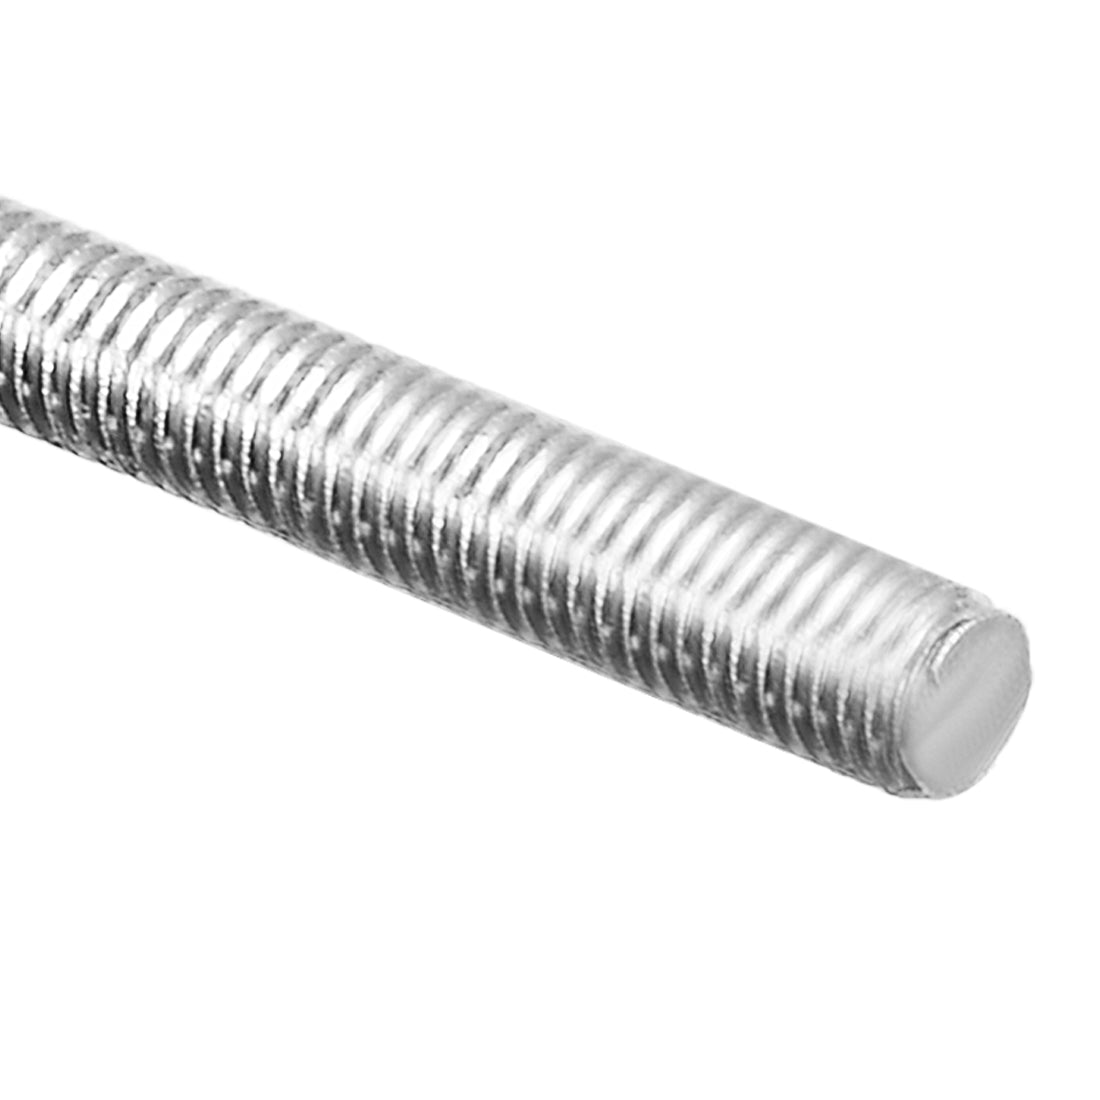 uxcell Uxcell M4 x 250mm Fully Threaded Rod 304 Stainless Steel Right Hand Threads